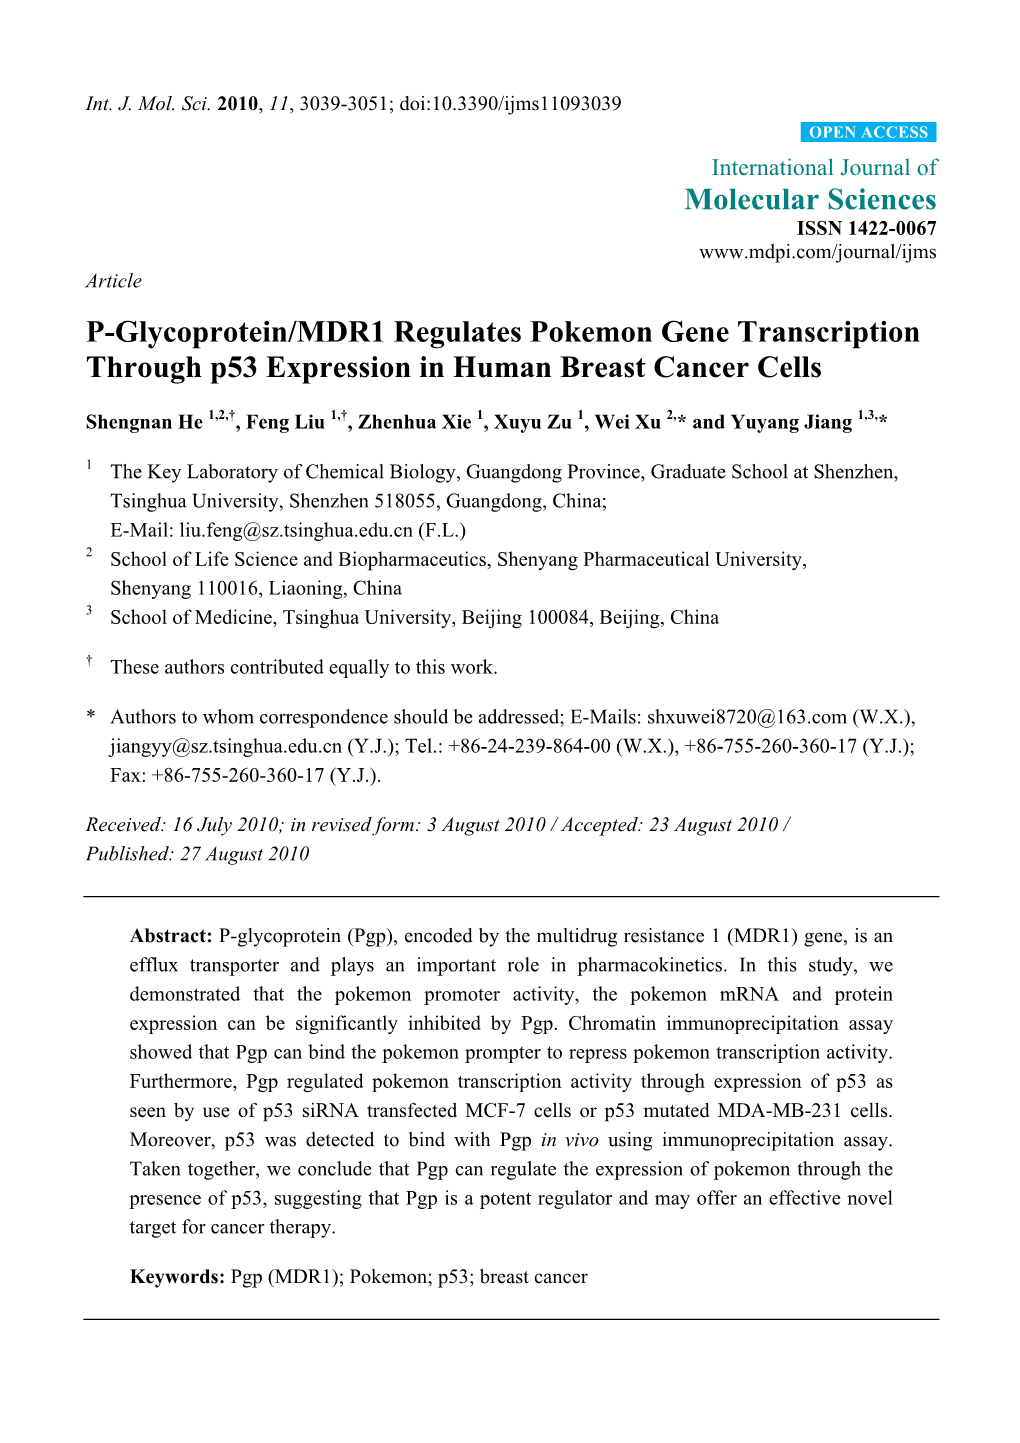 P-Glycoprotein/MDR1 Regulates Pokemon Gene Transcription Through P53 Expression in Human Breast Cancer Cells